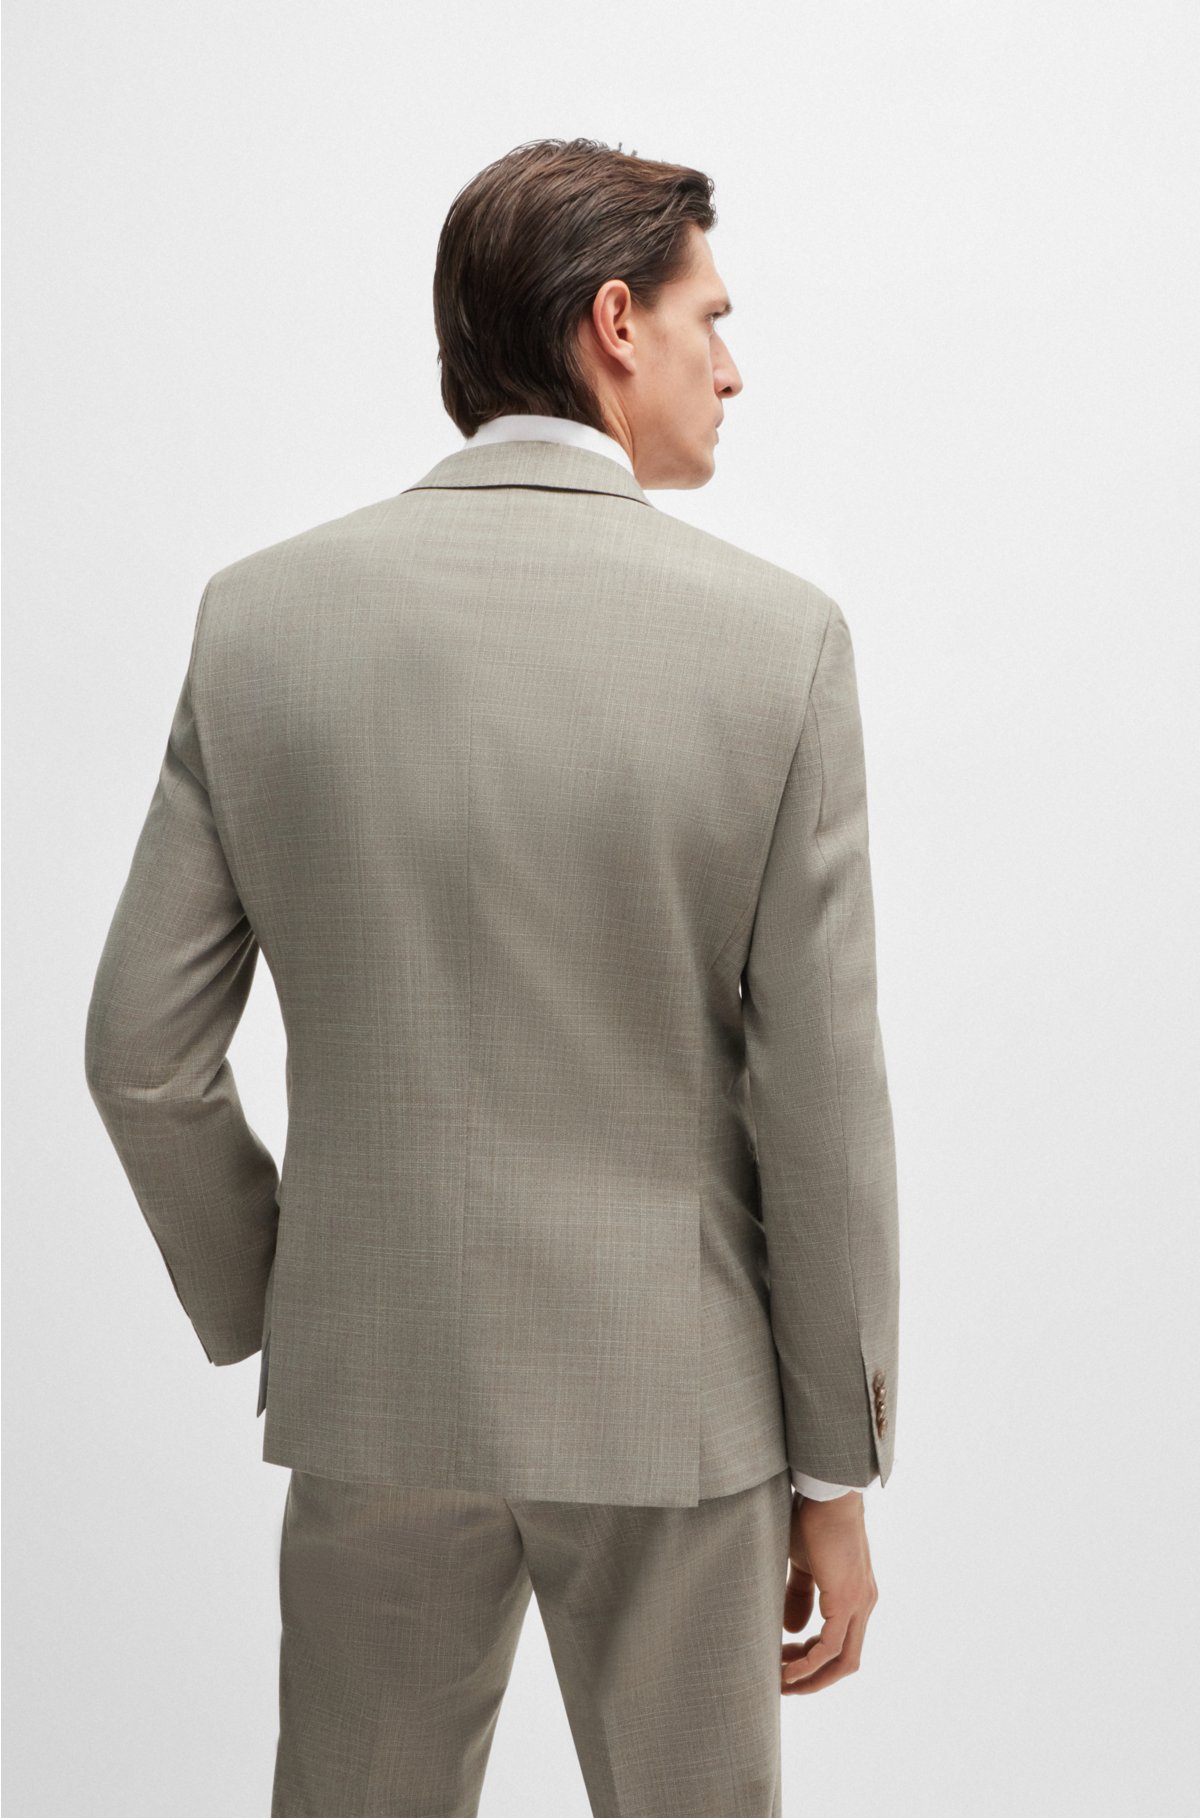 Slim-fit suit in patterned stretch cloth, Light Beige